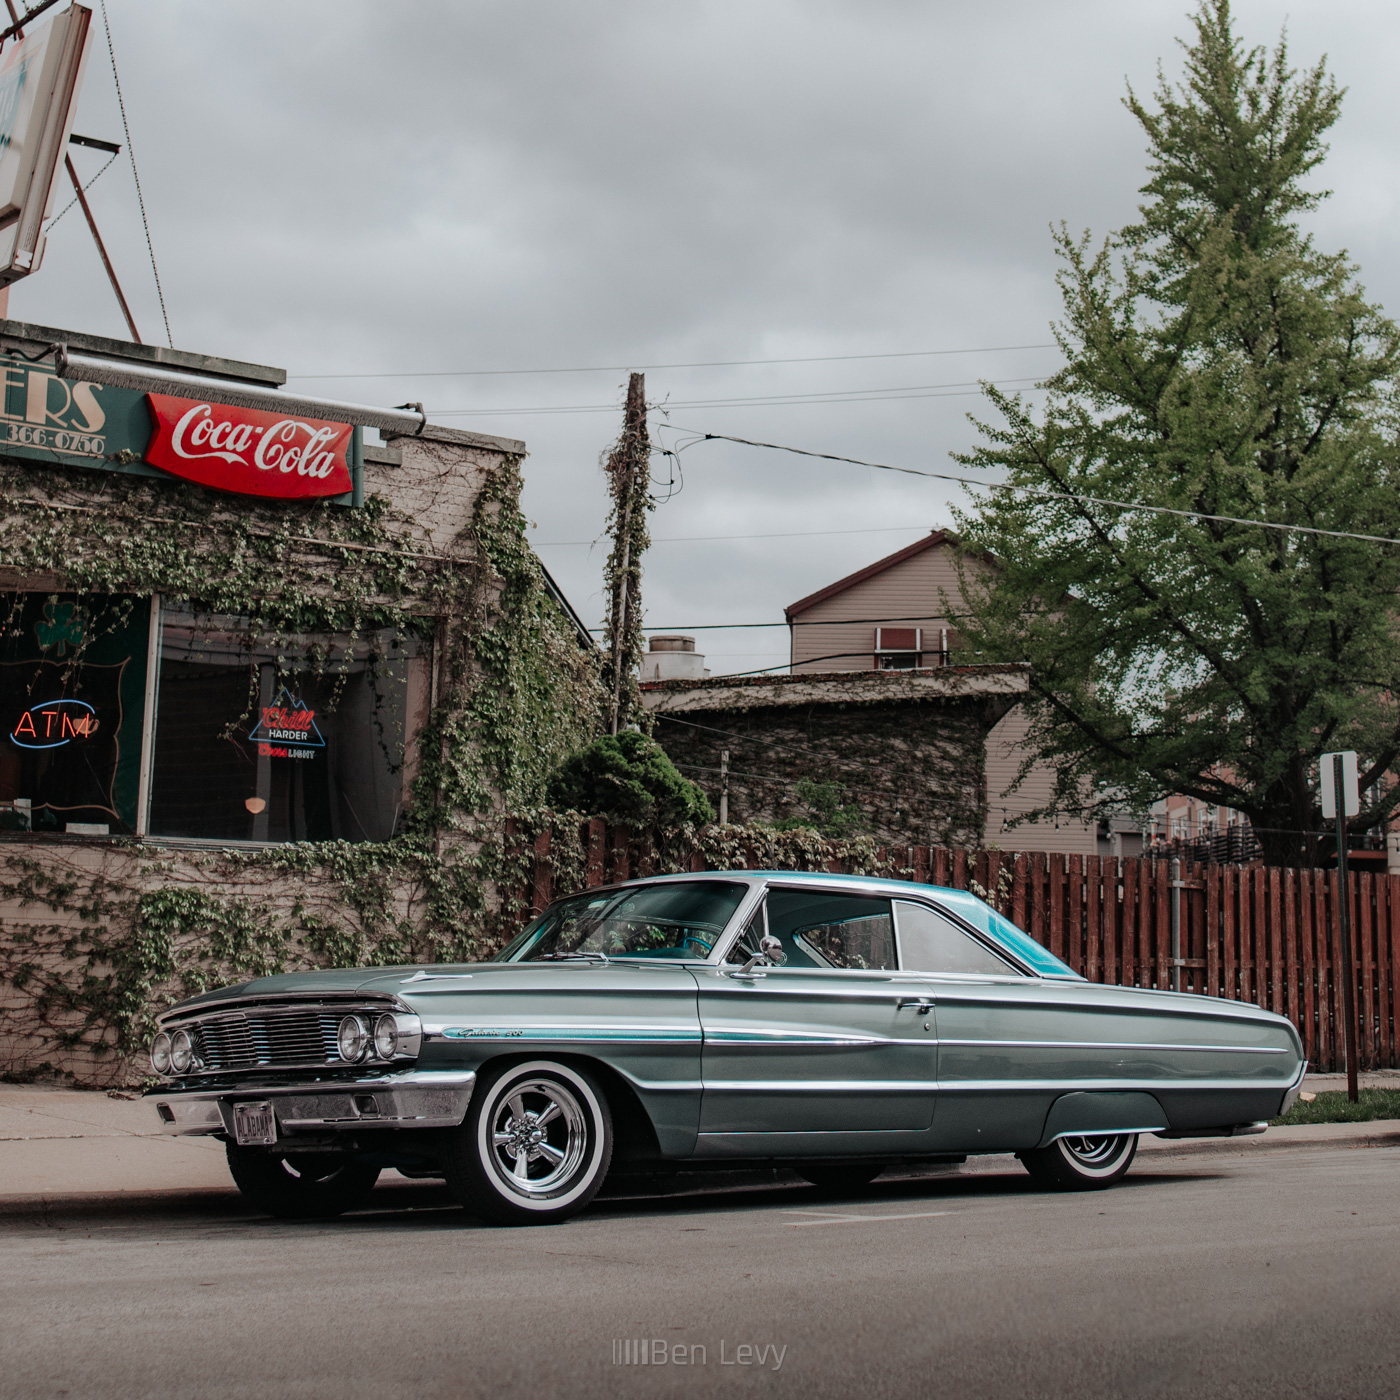 Blue Ford Galaxie 500 outside of a Bar